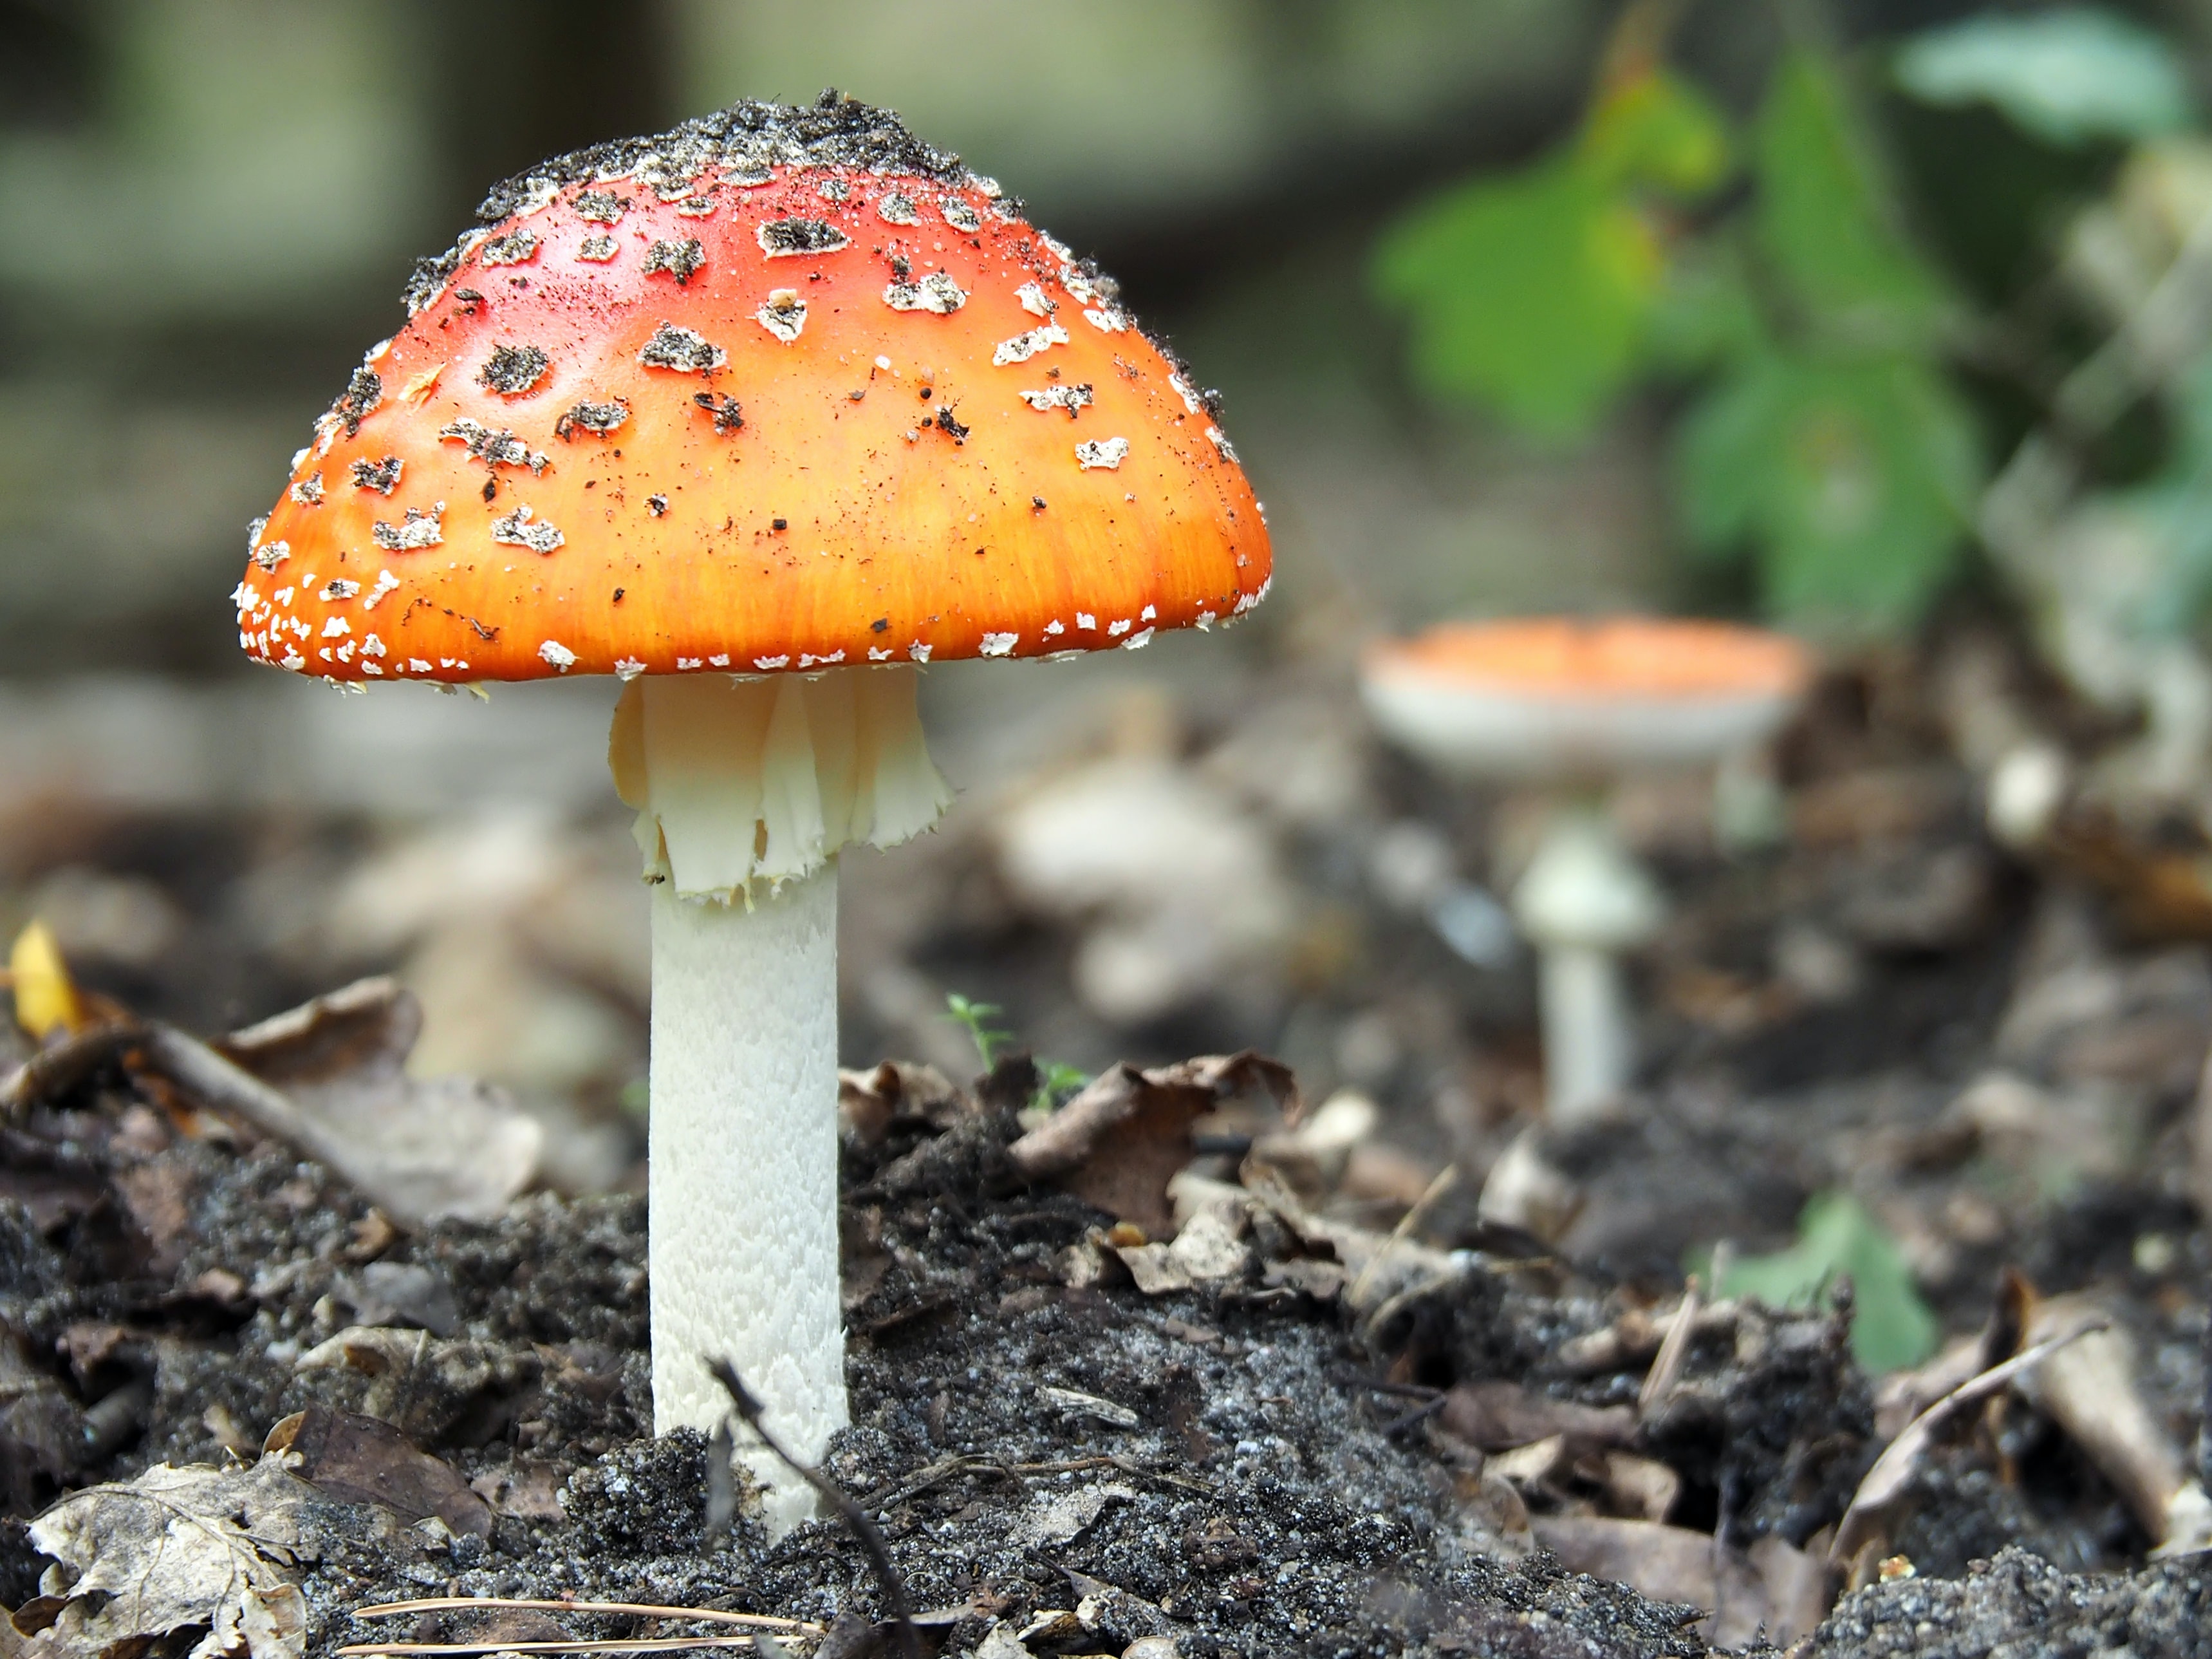 What are the benefits of taking mushroom supplements?